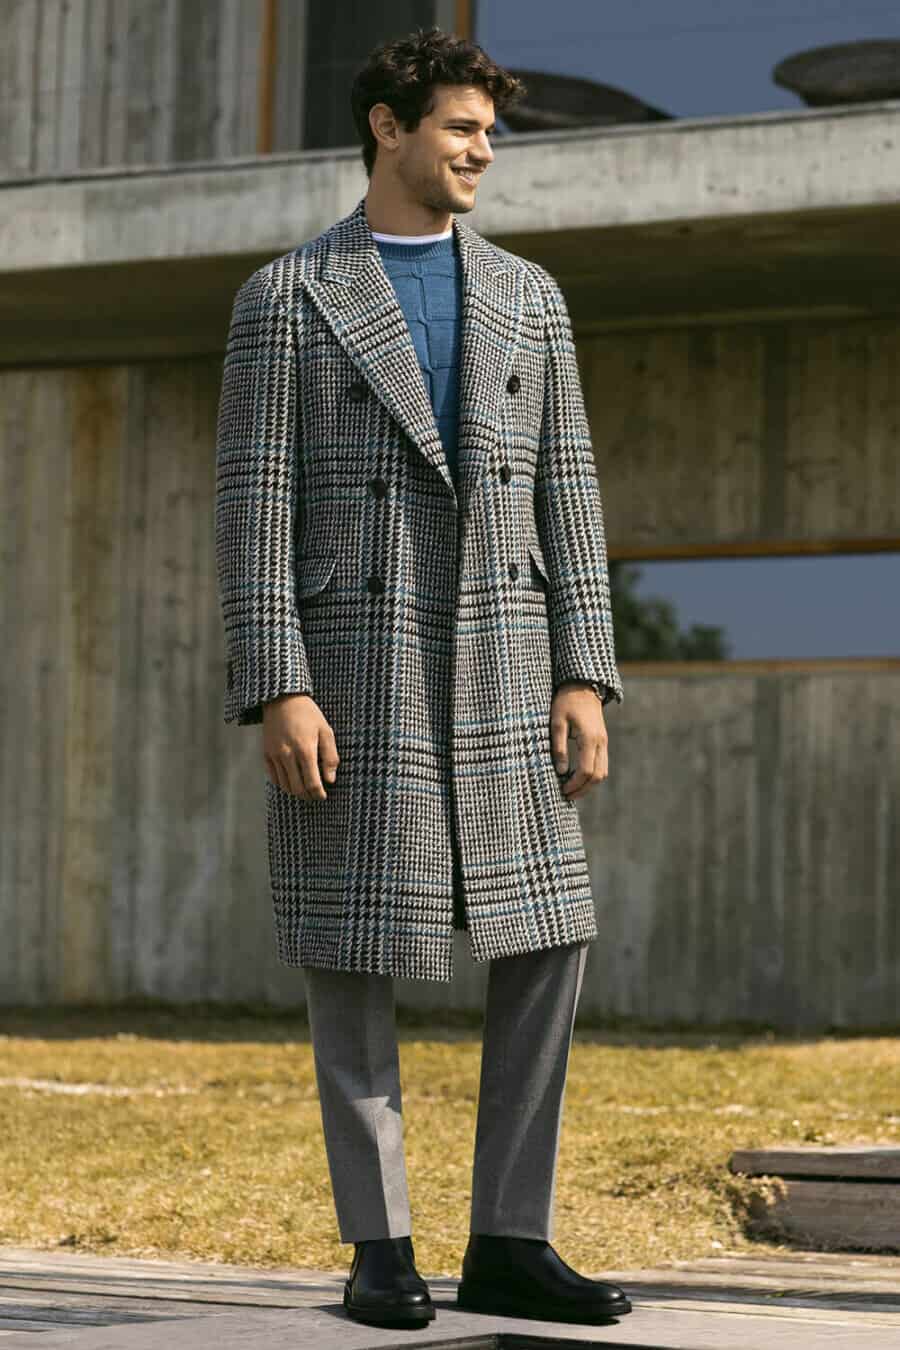 Men's tailored overcoat with trousers and chelsea boots outfit